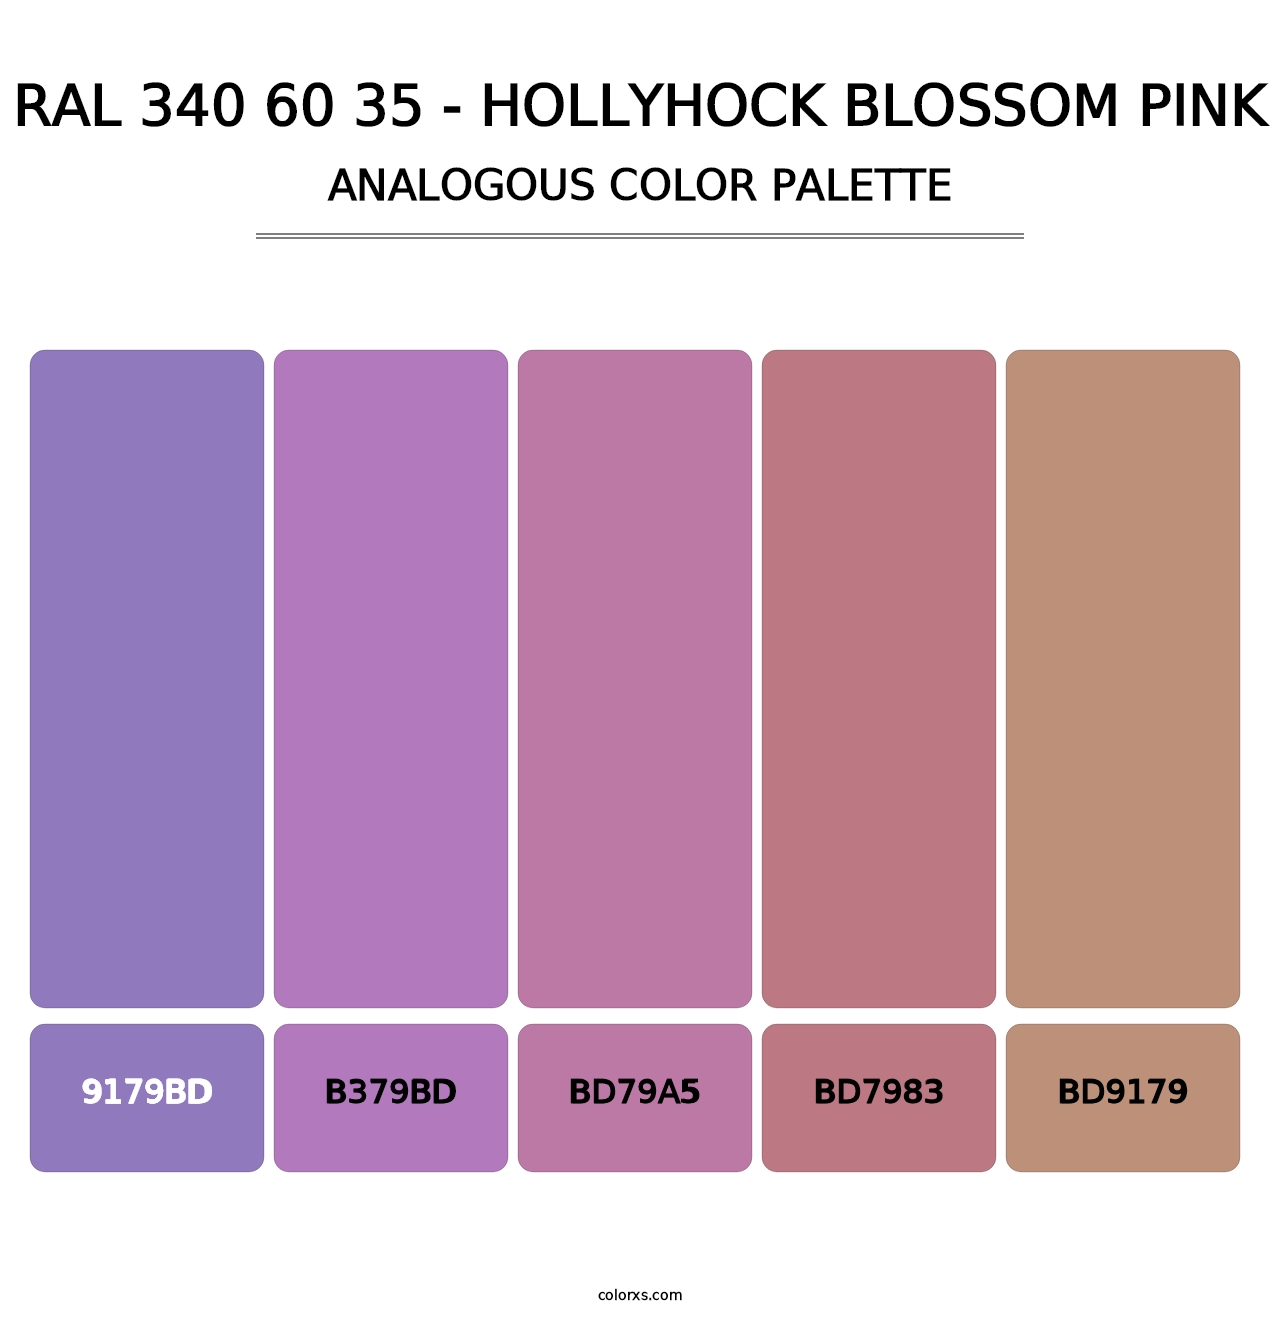 RAL 340 60 35 - Hollyhock Blossom Pink - Analogous Color Palette